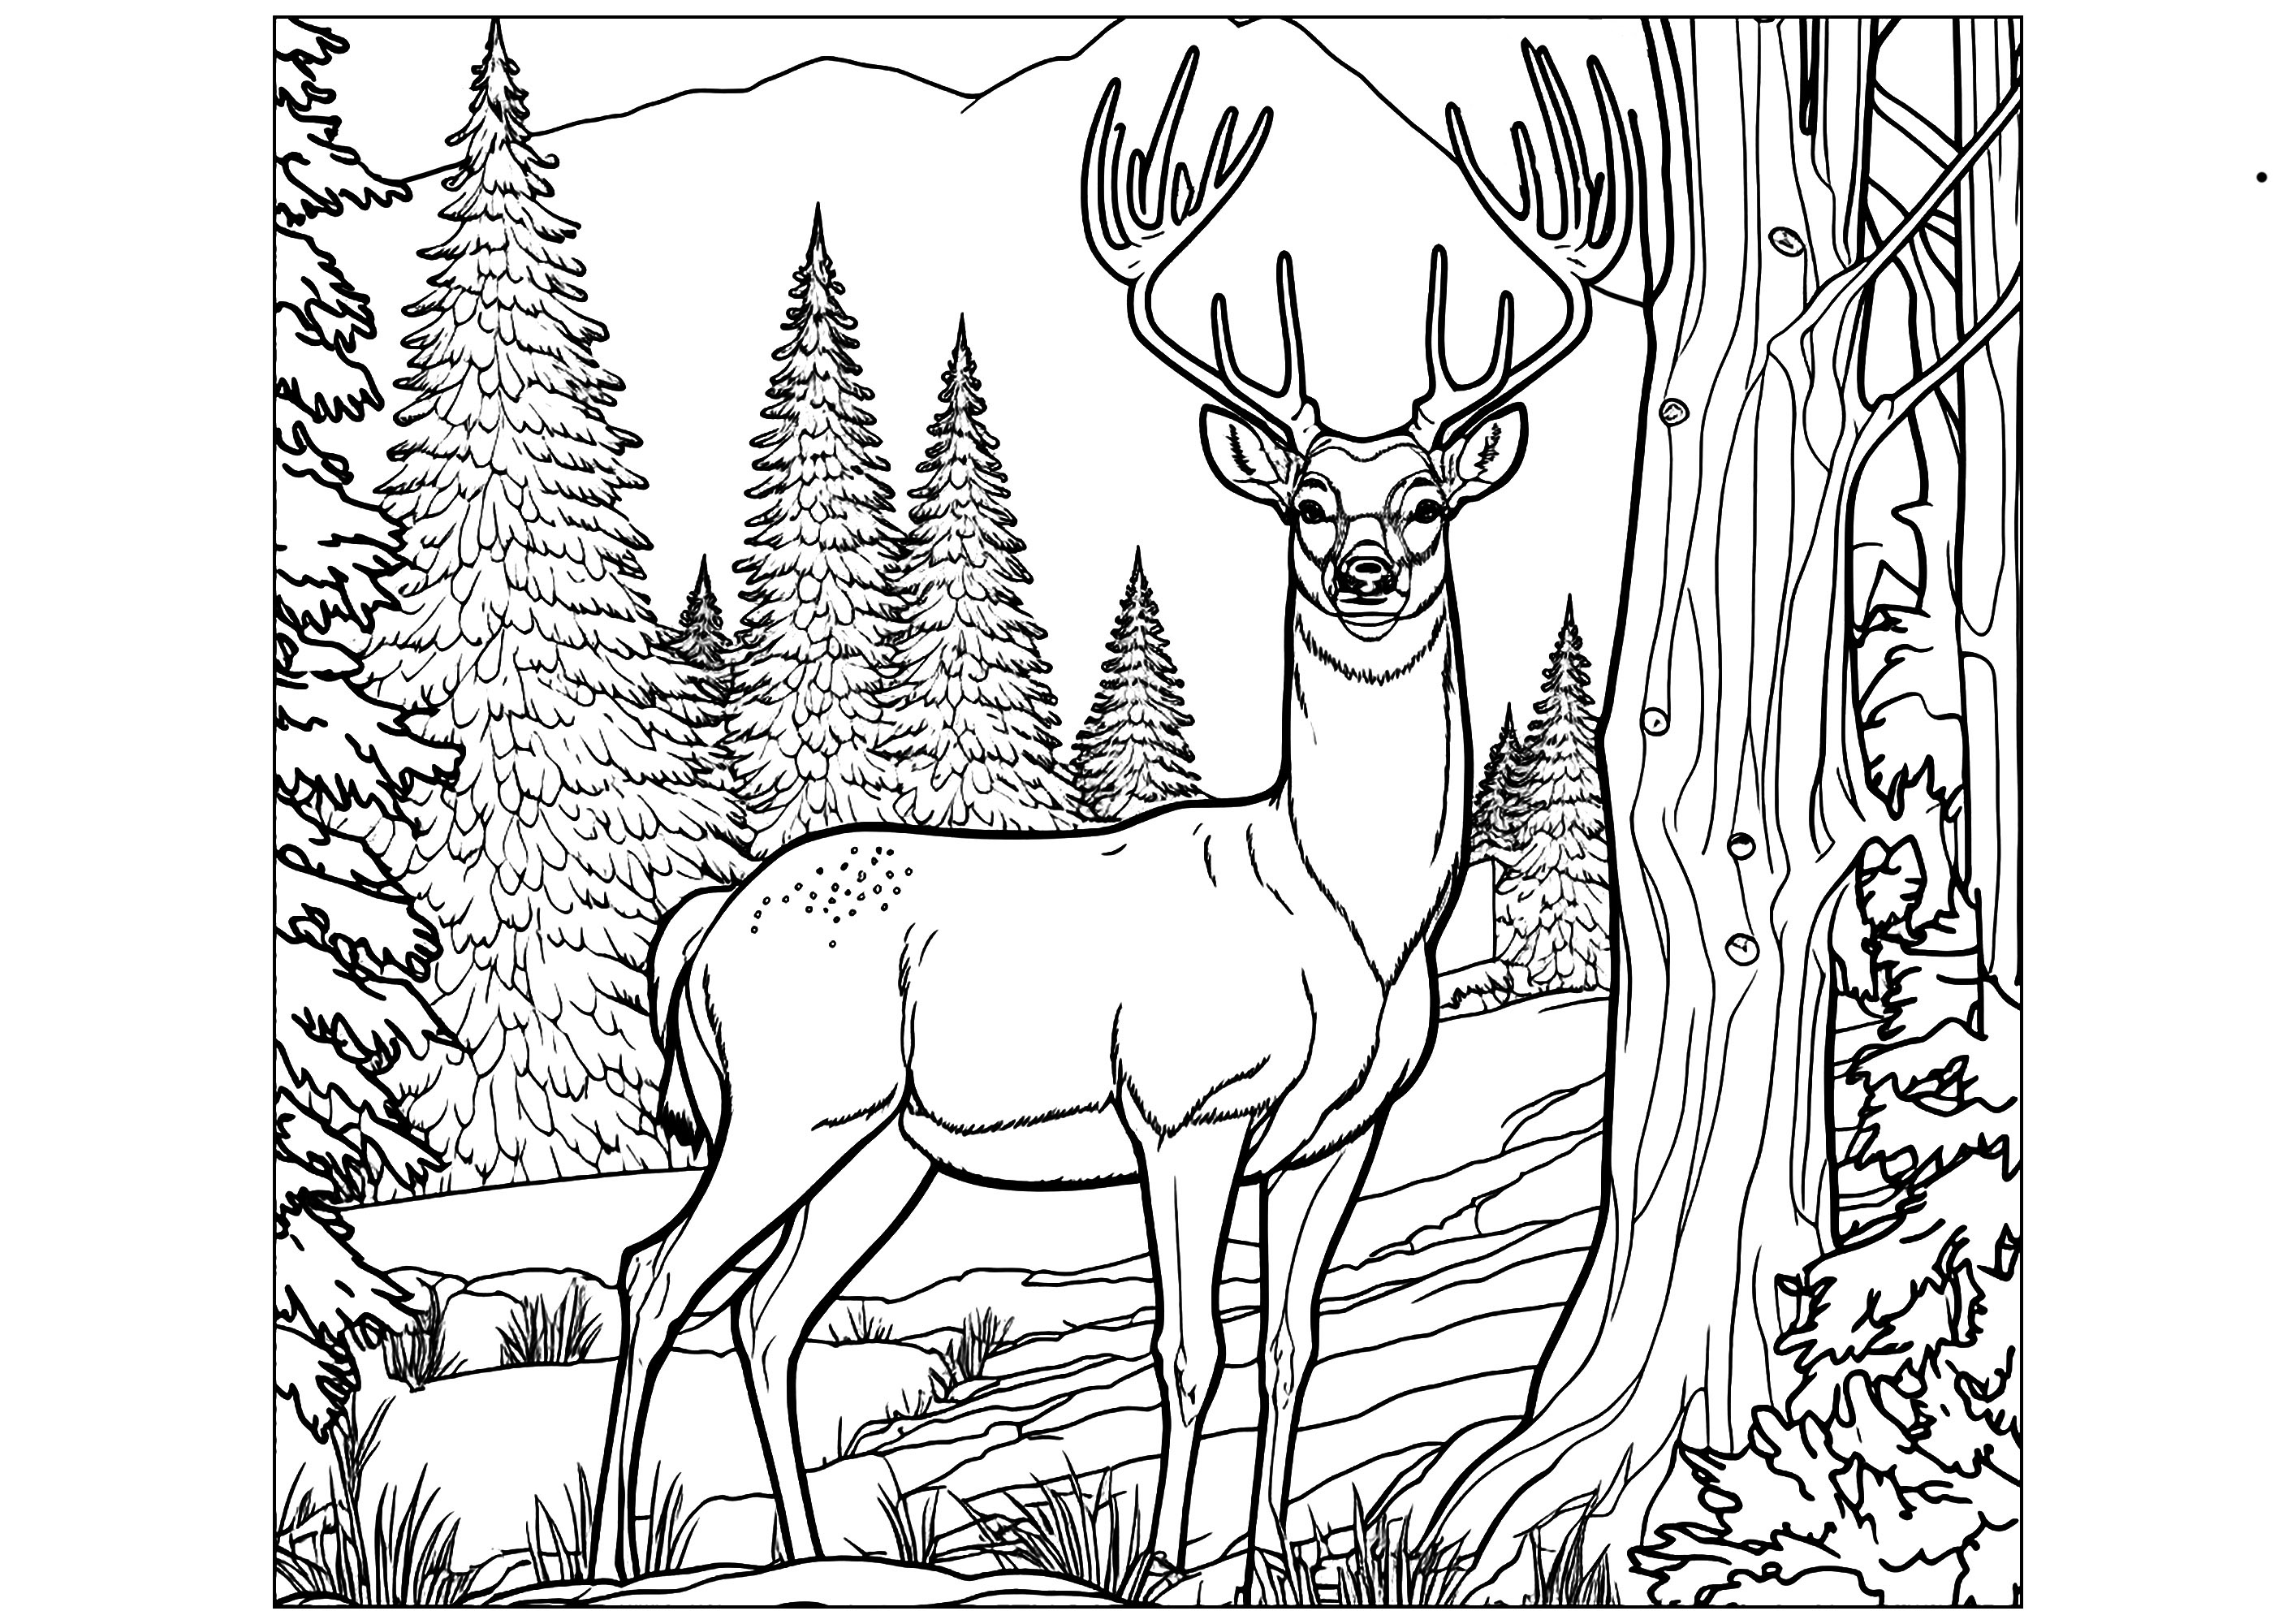 Coloring of a majestic deer in the forest